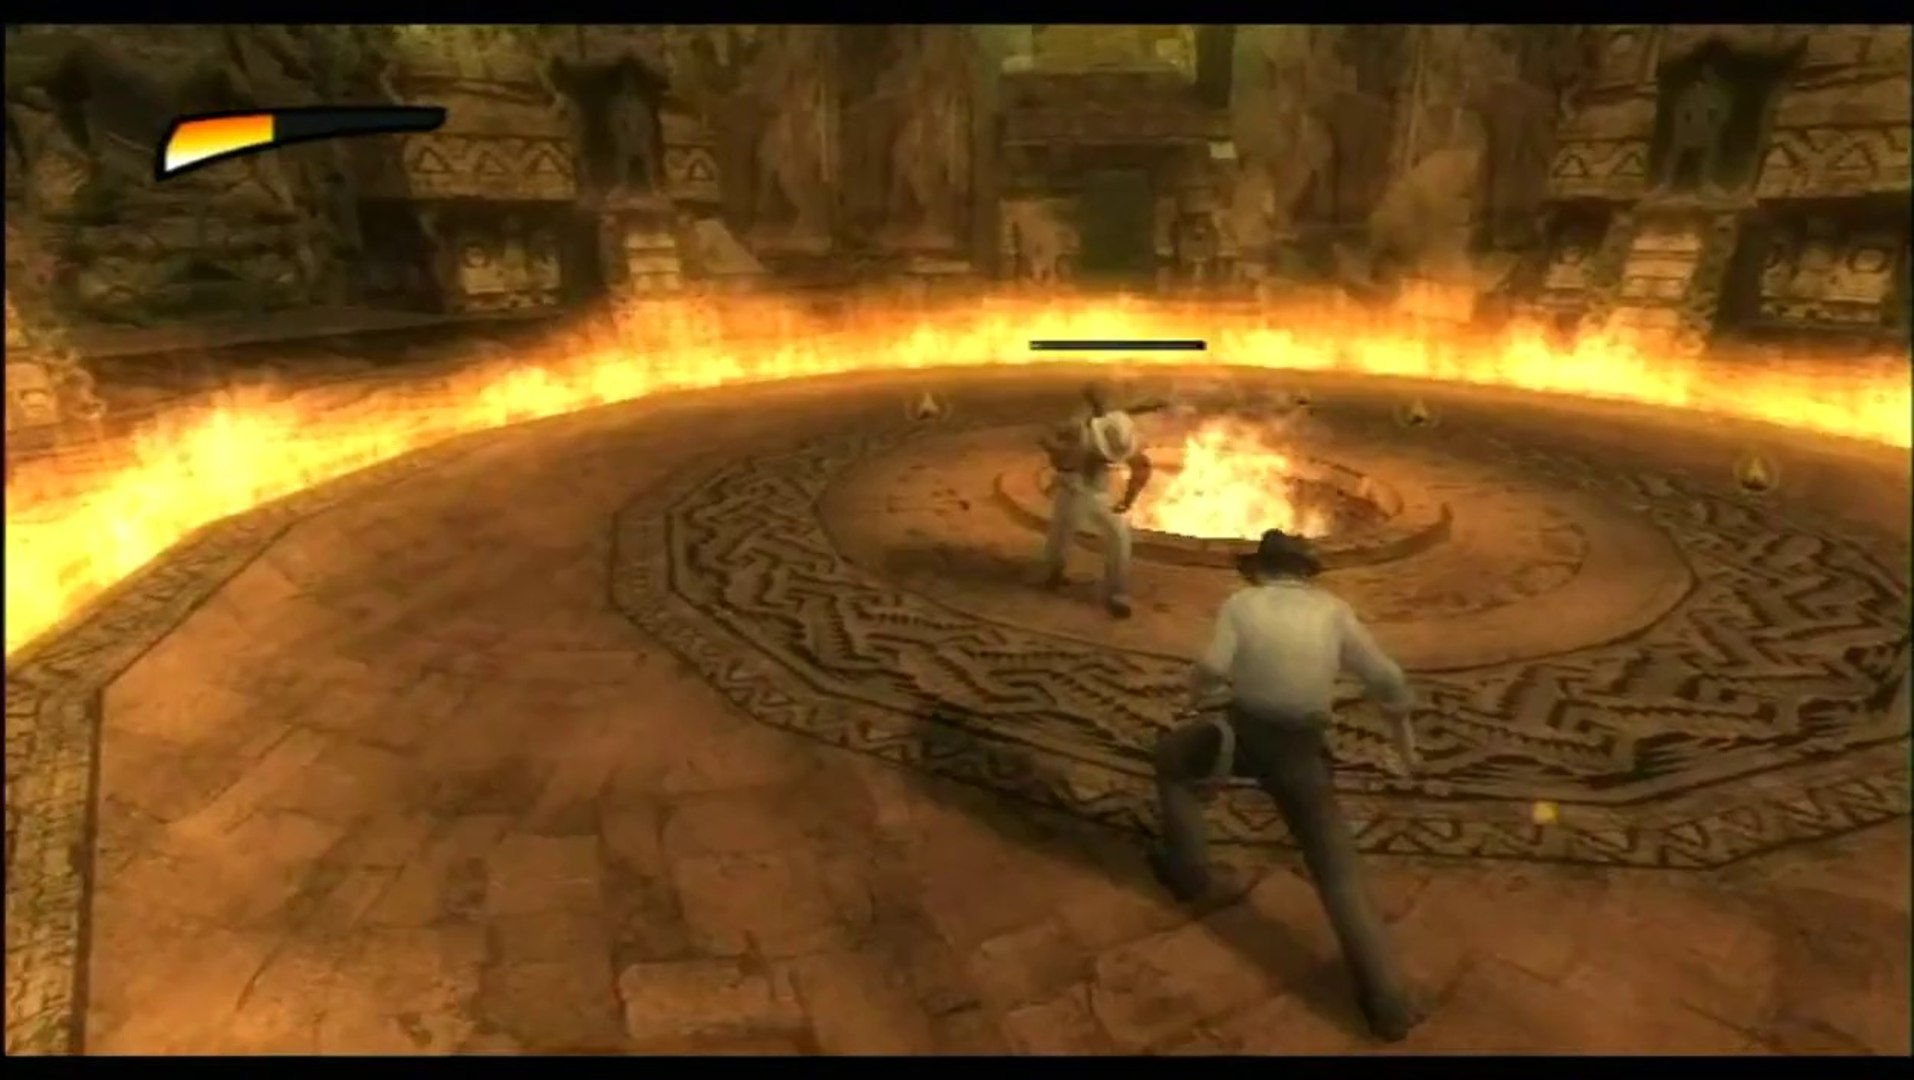 Indiana Jones and the Staff of Kings (Wii, PS2) Walkthrough Part 7